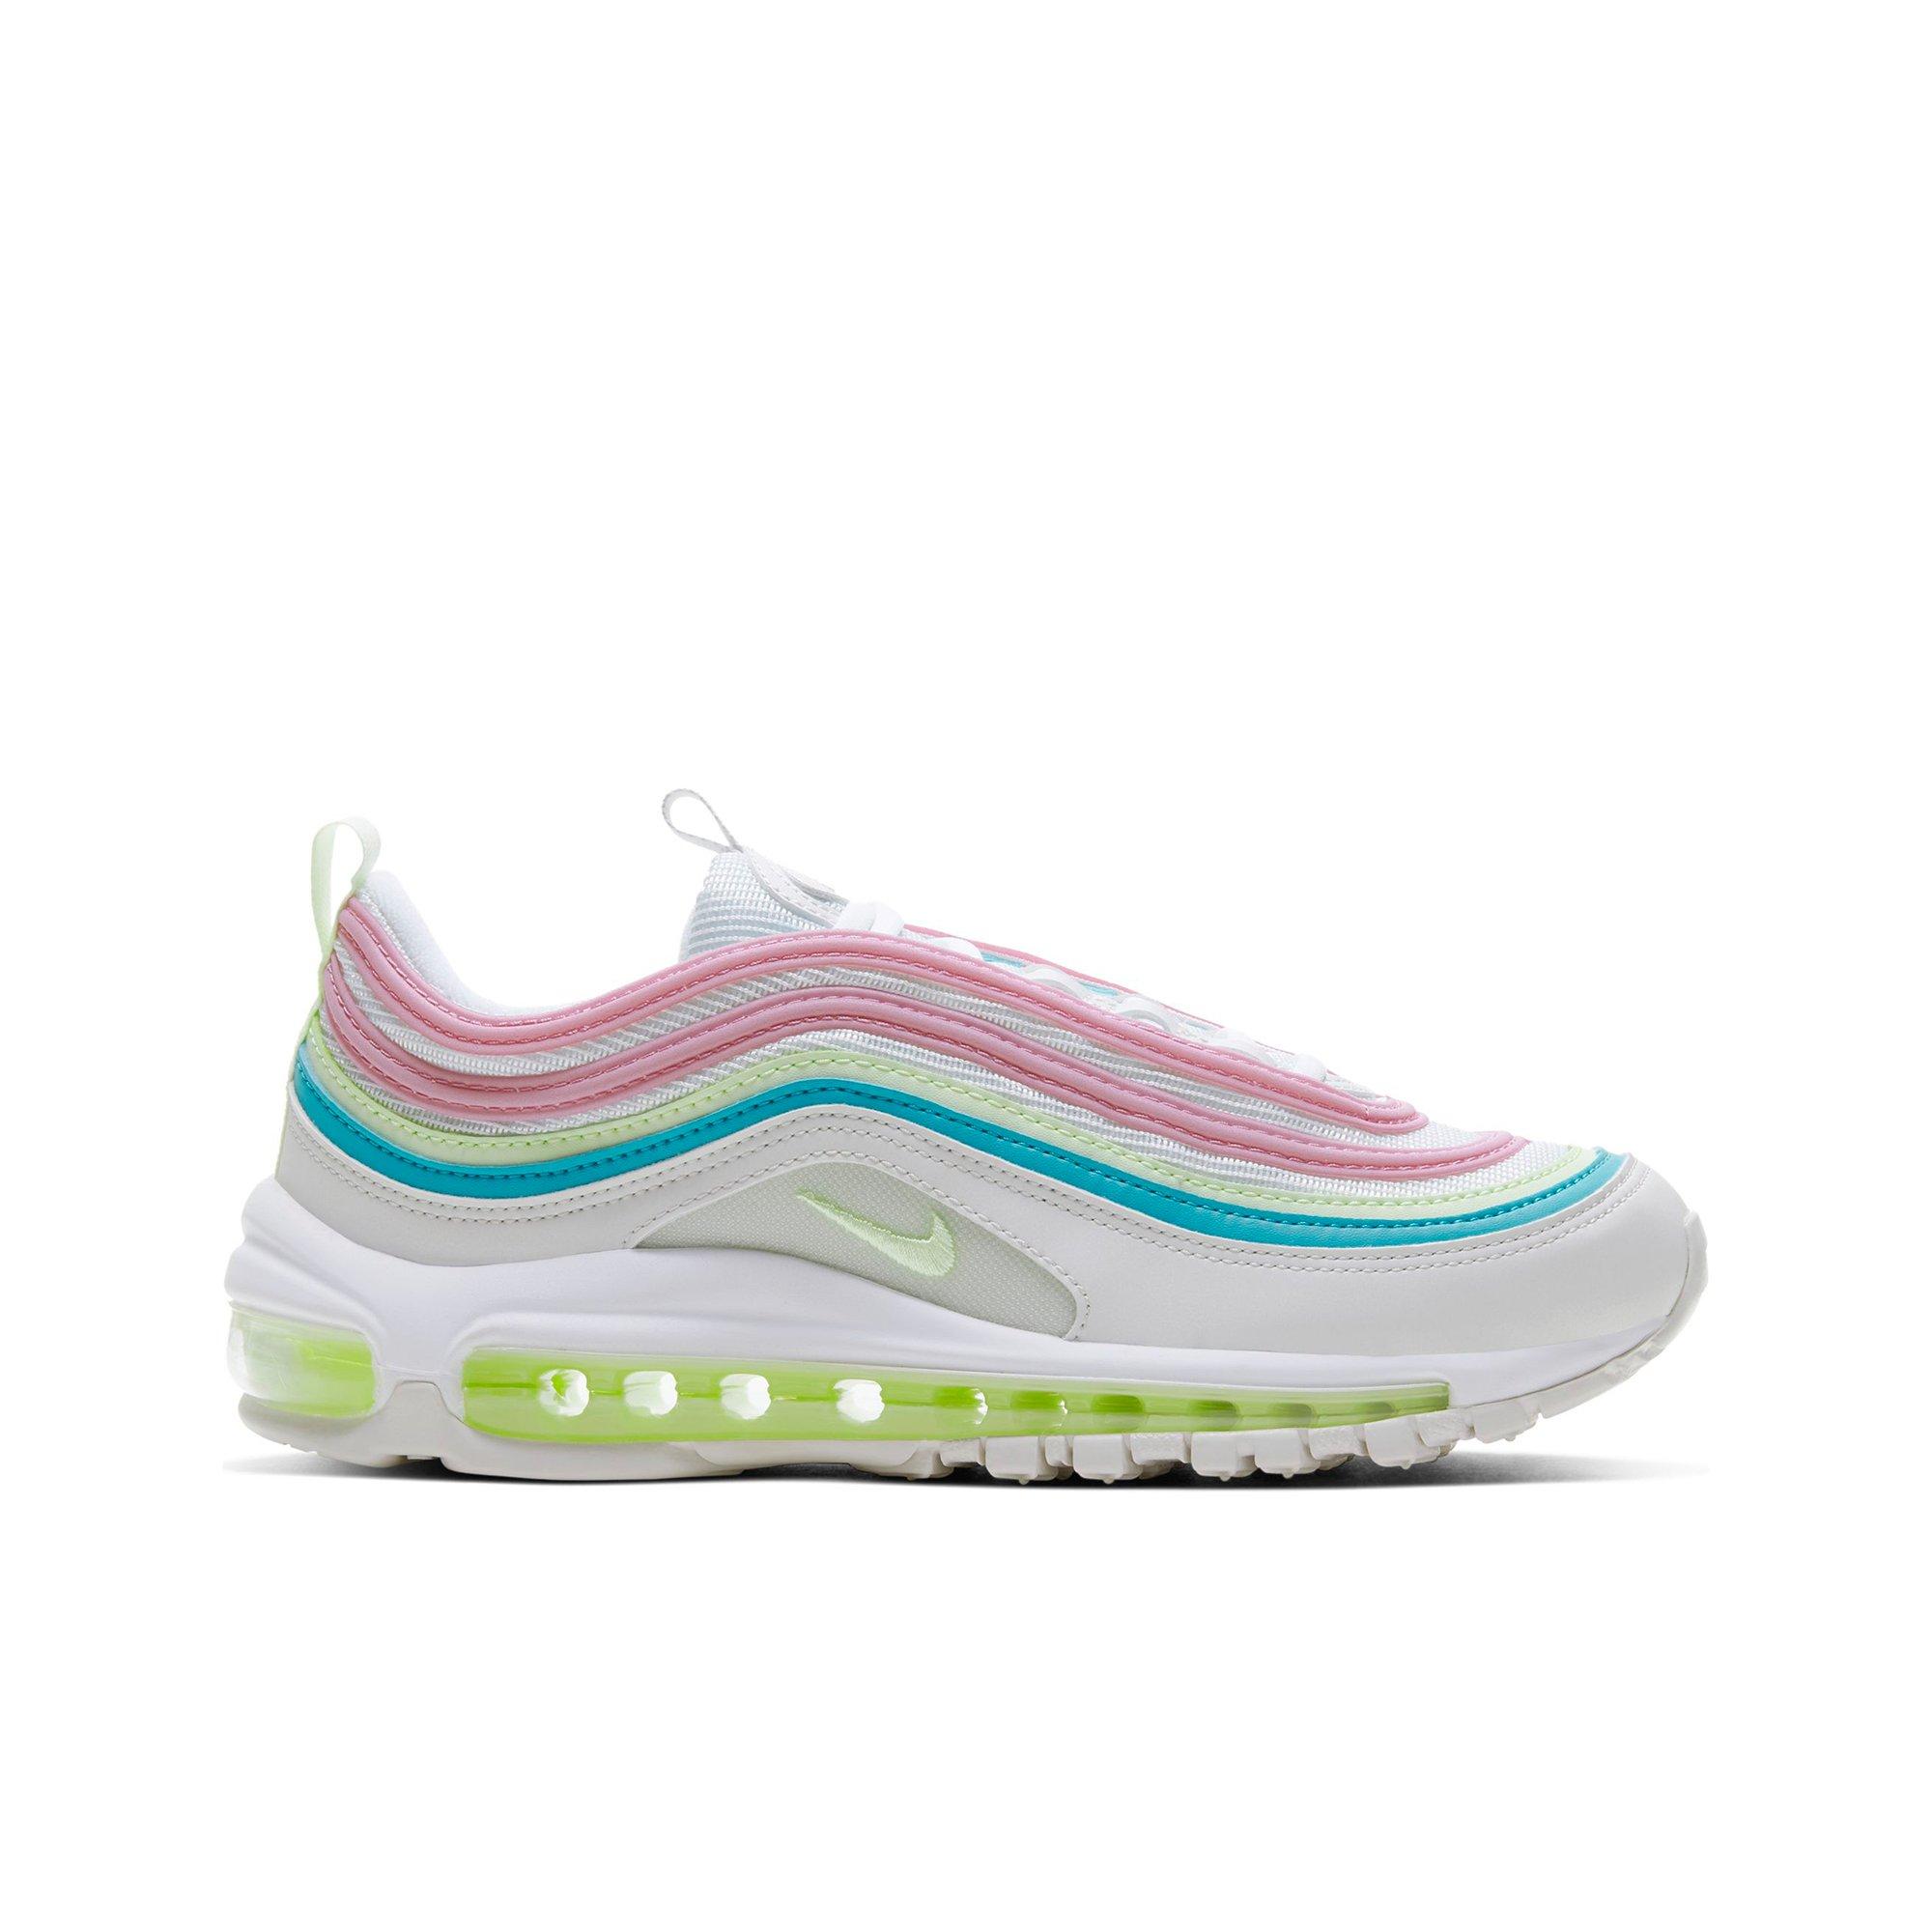 air max 97 white blue and pink